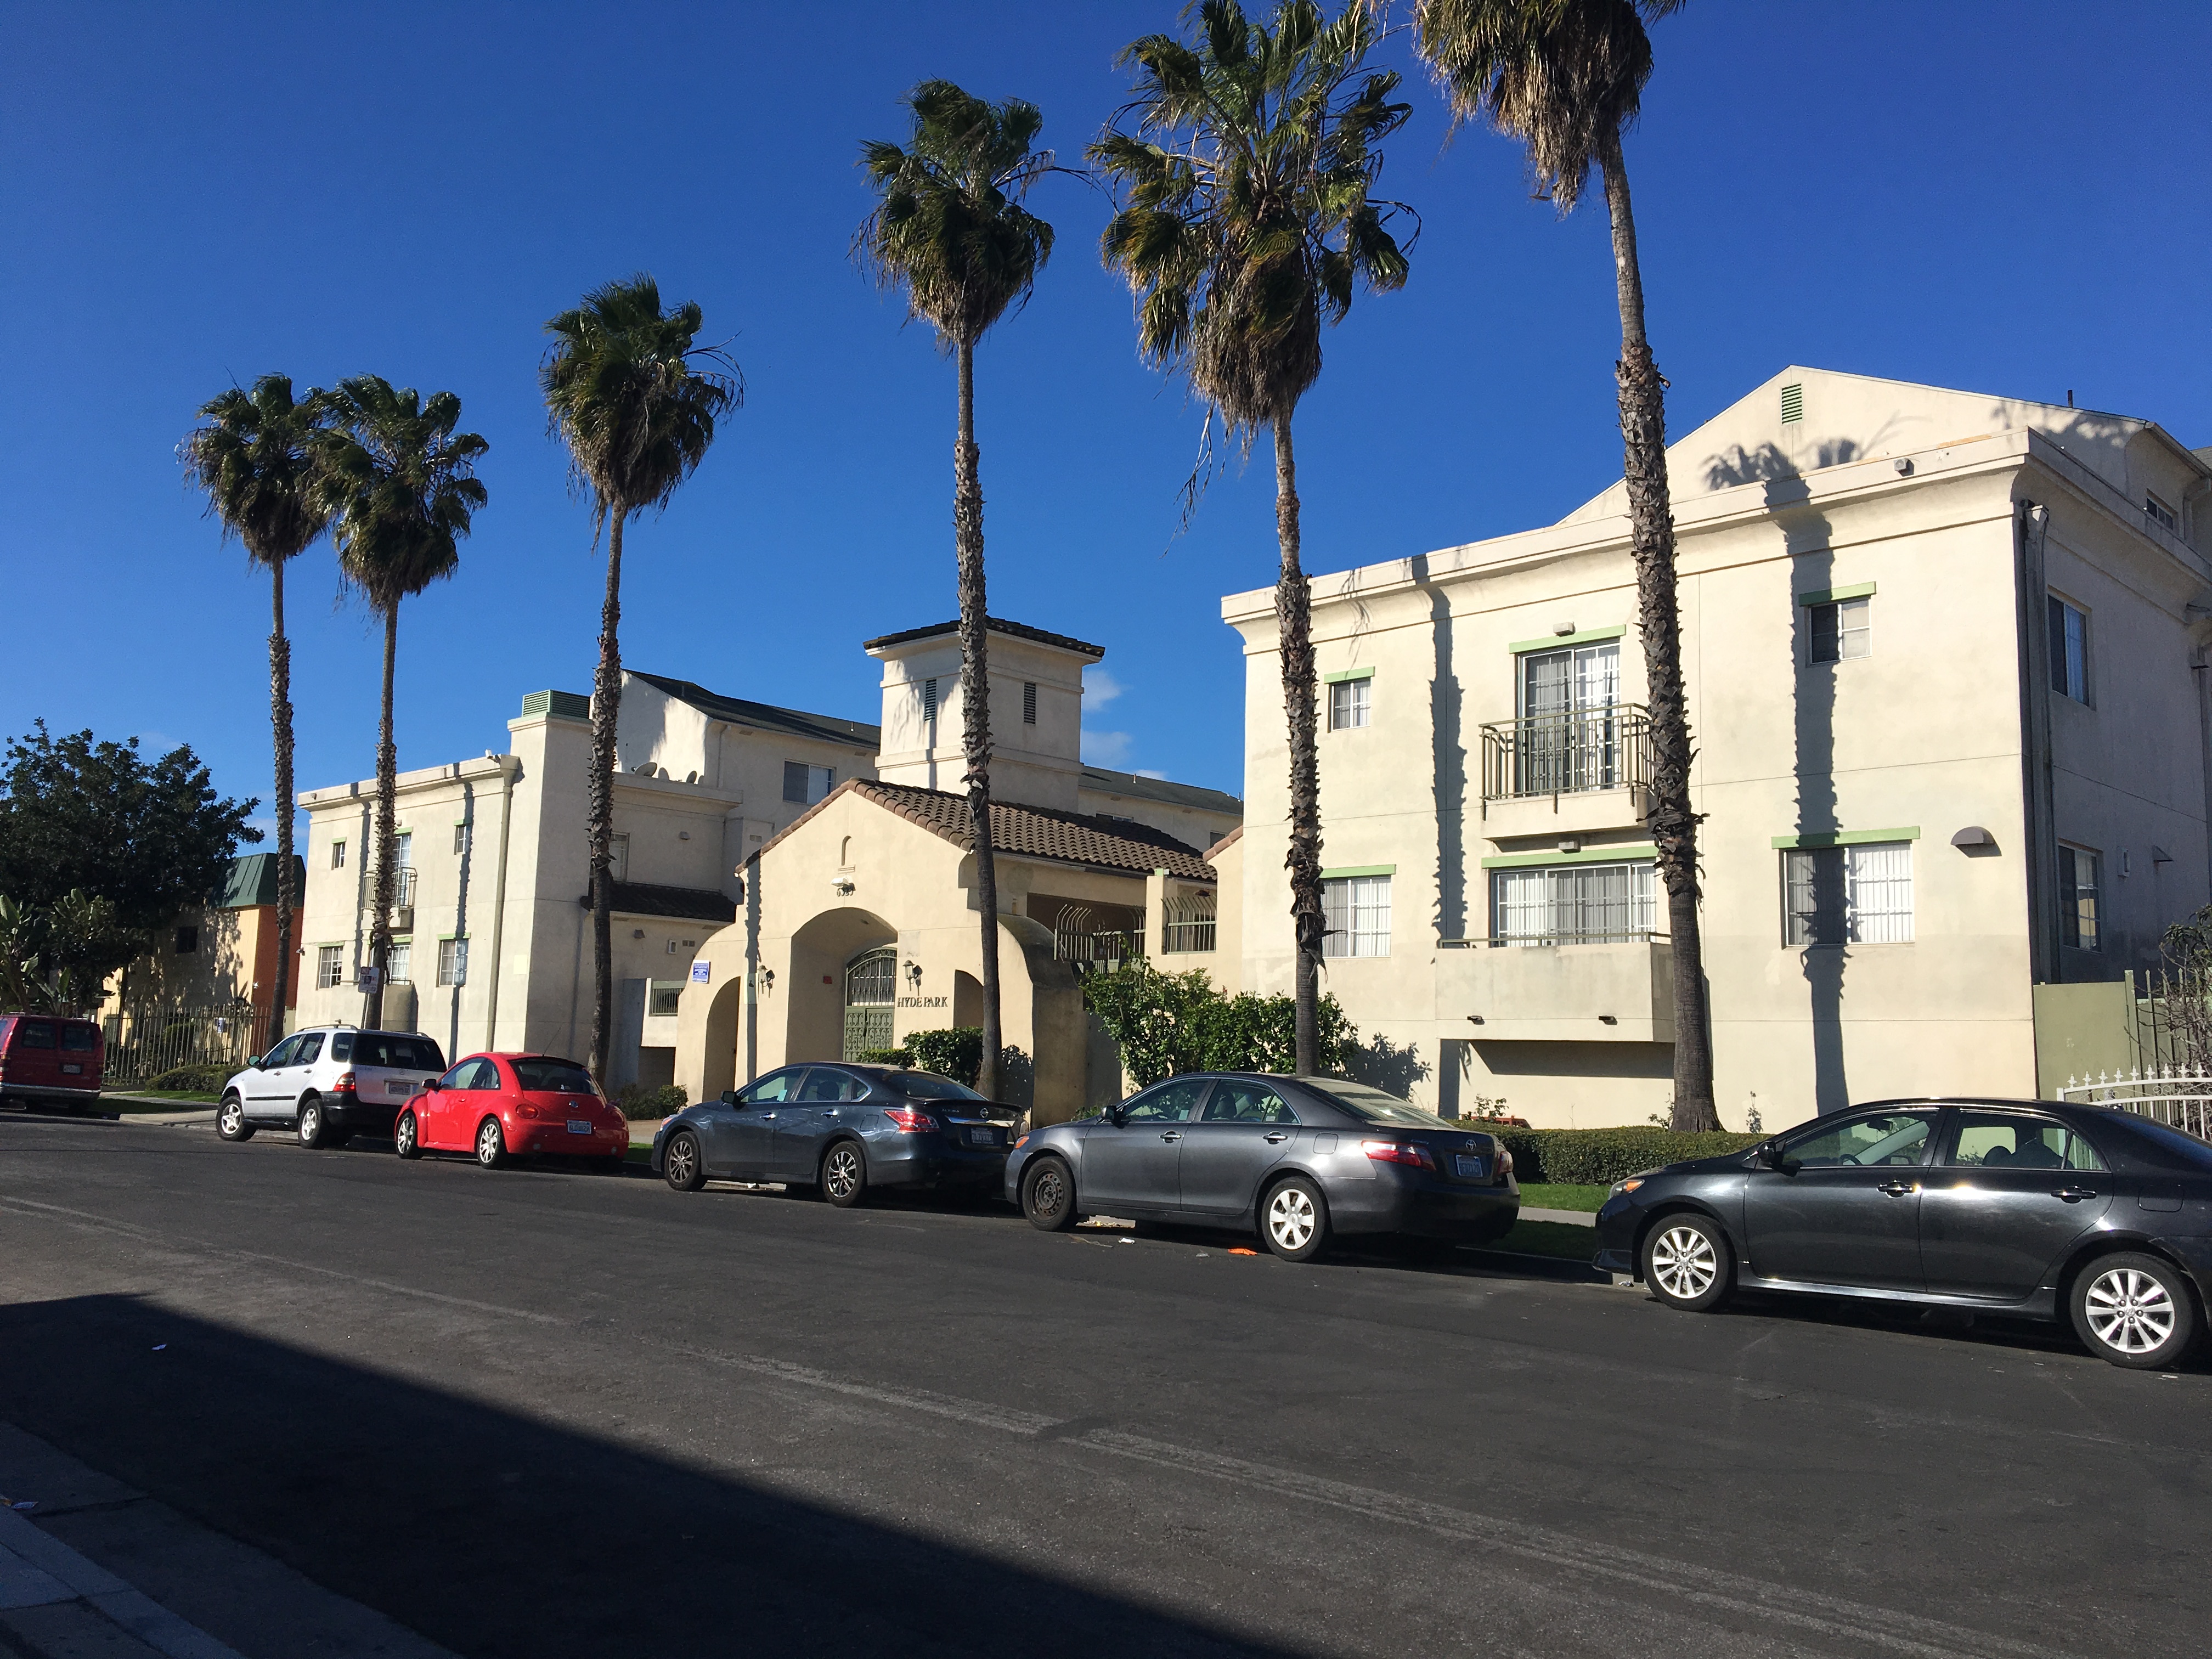 Street view of Hyde Park Place Apartments. Palm trees line the sidwalk along the building with cars parked on the street in front of the building